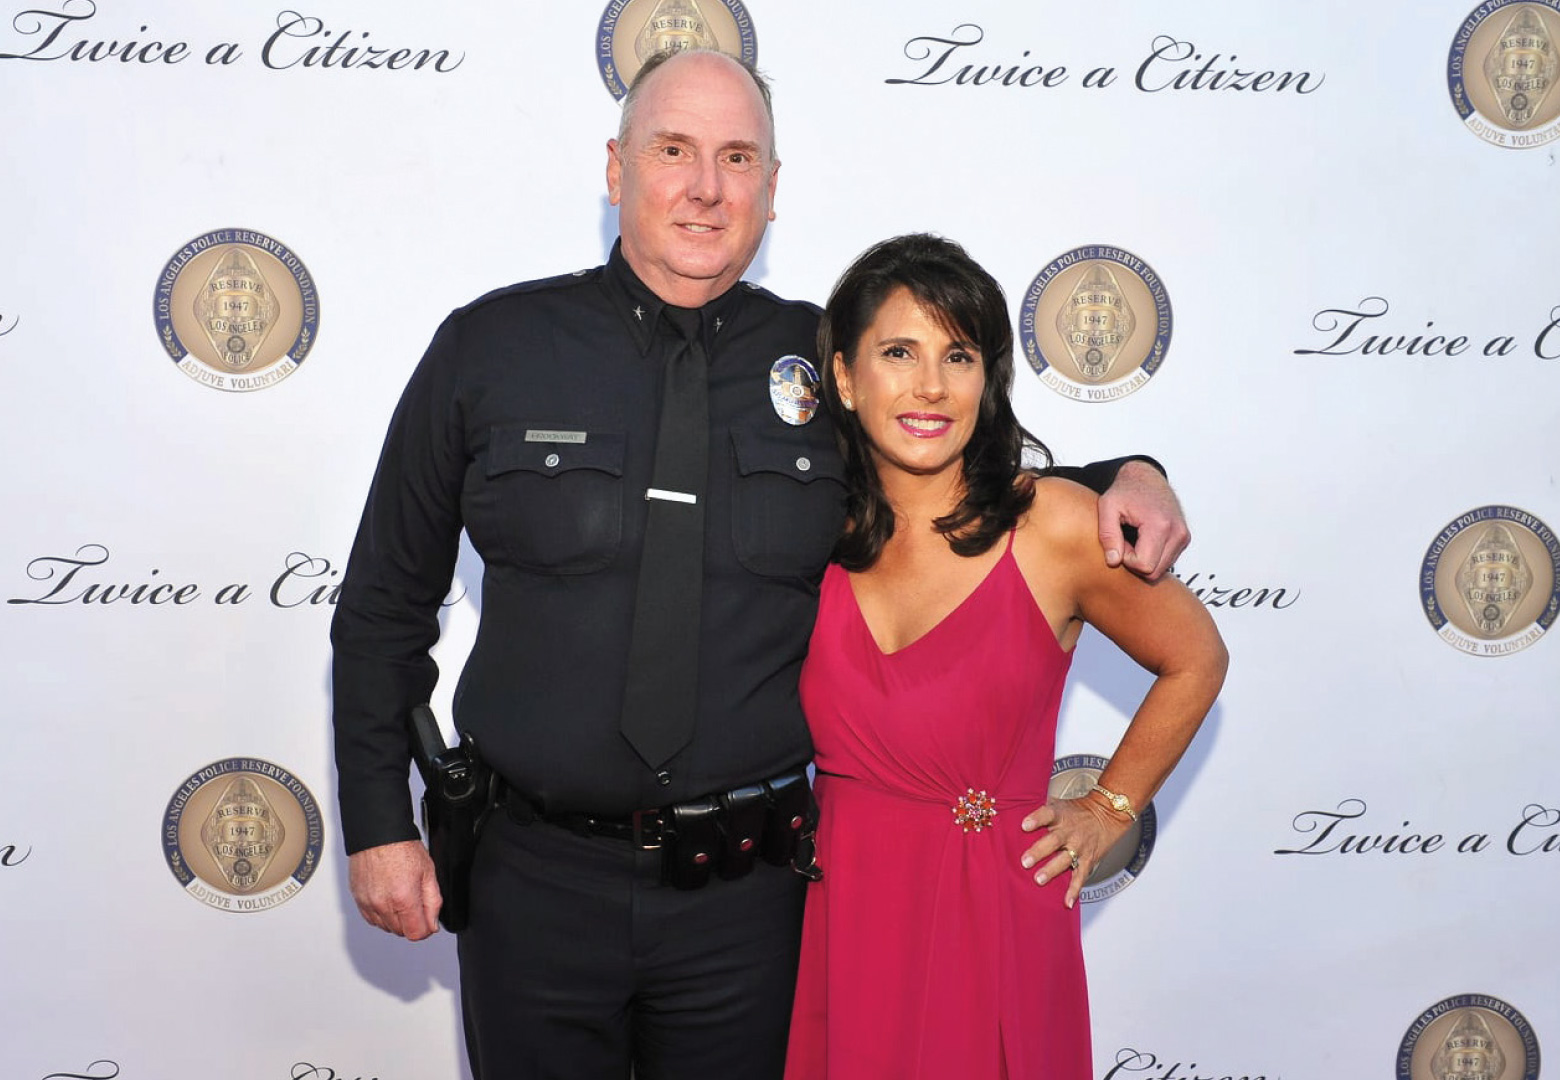 skirball-reopens-reserve-officer-of-the-year-twice-a-citizen-gala-7